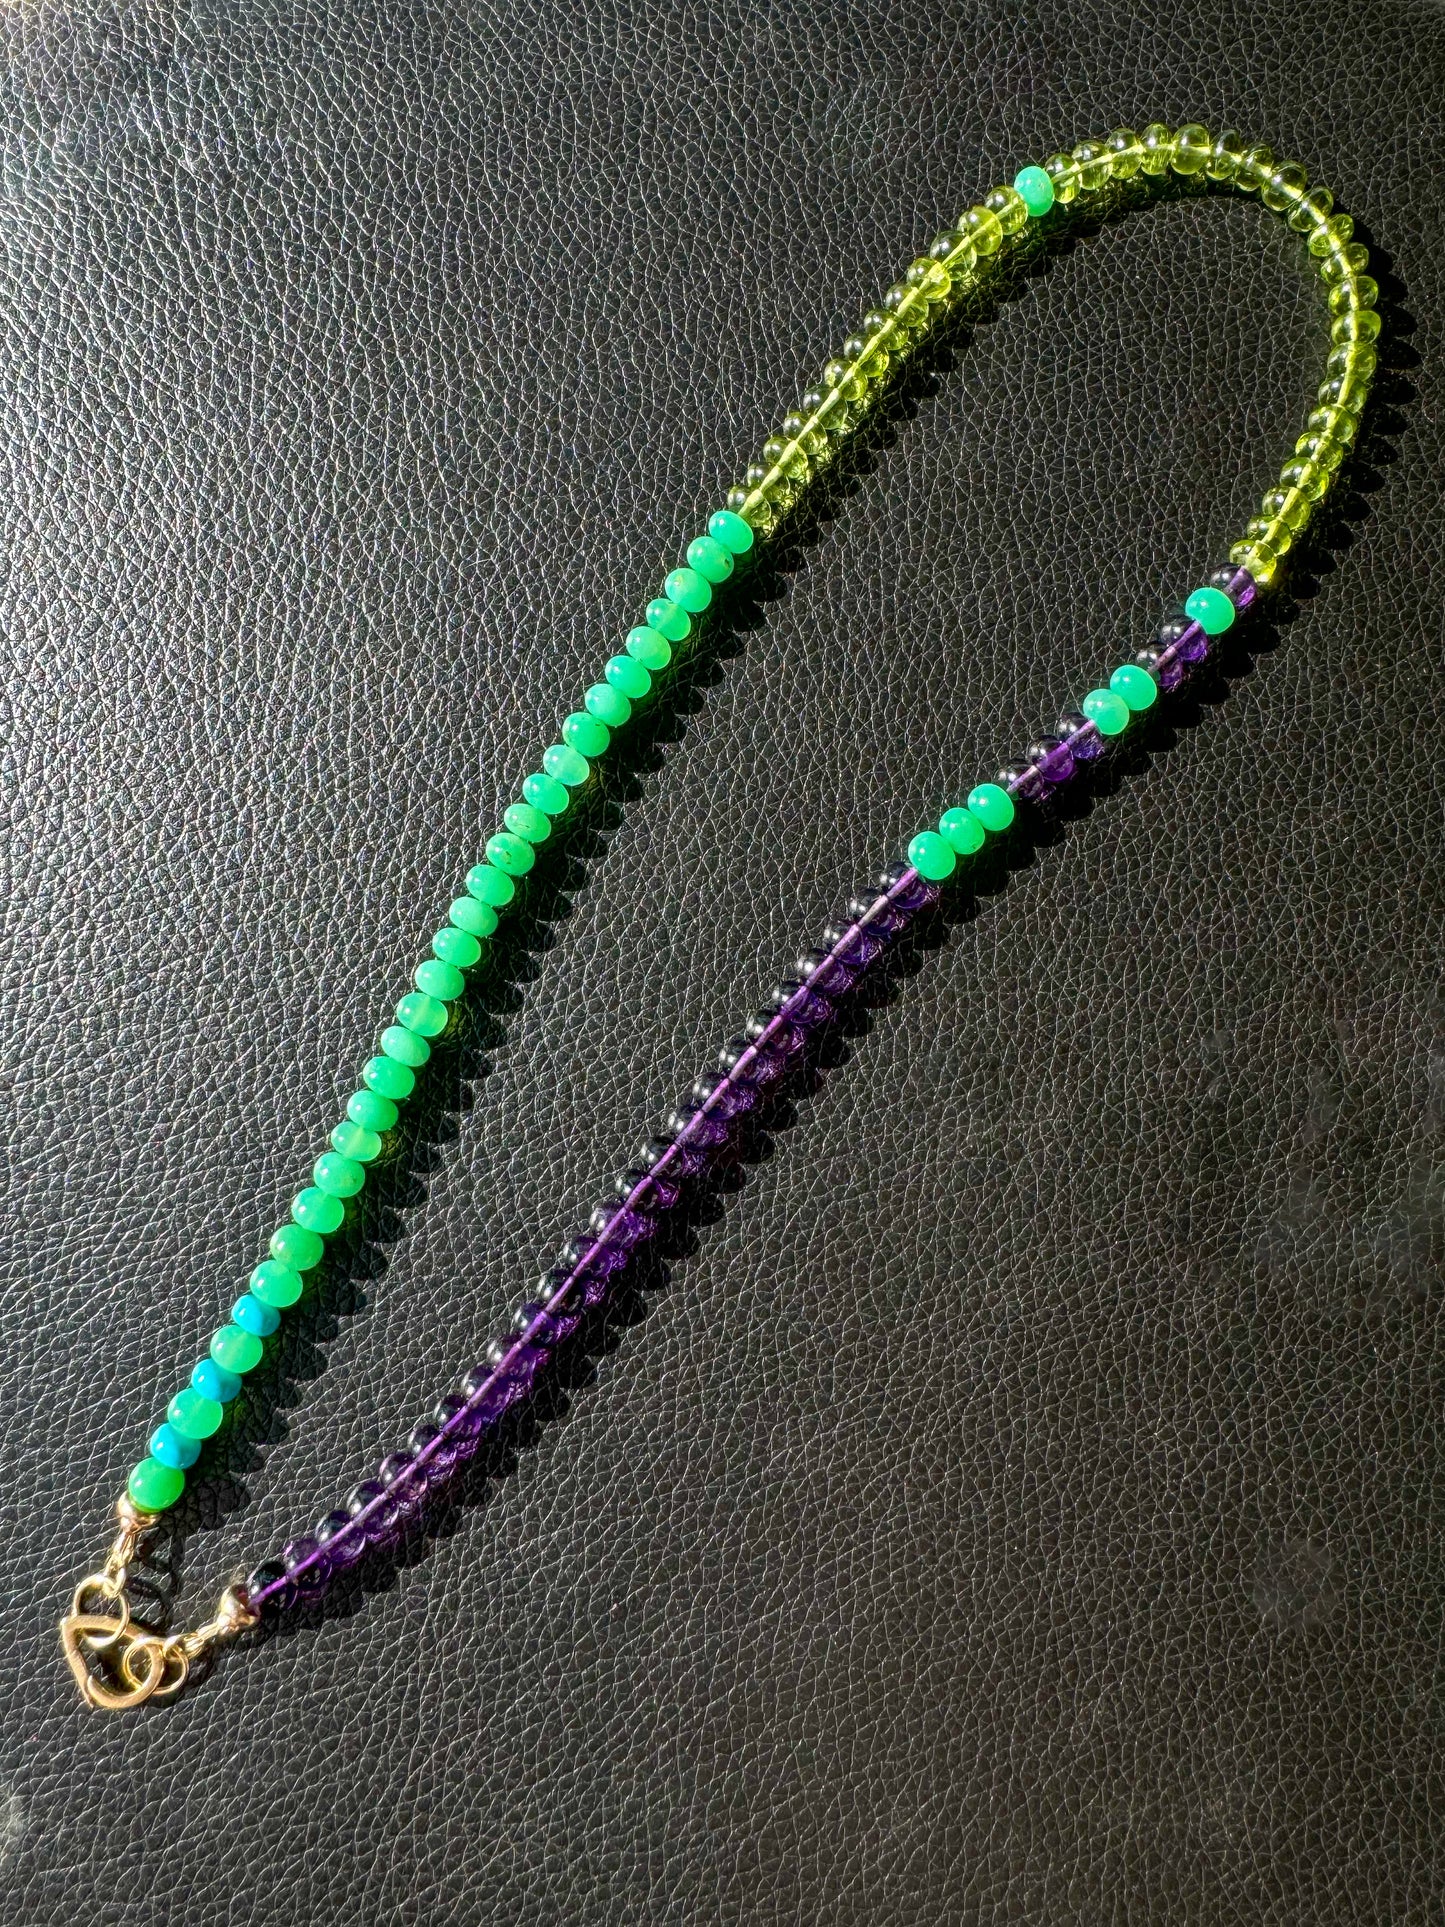 Petal Bloom - Gemmy Amethyst, Chrysoprase, Peridot and Turquoise Beaded Necklace with 14K Open Loops